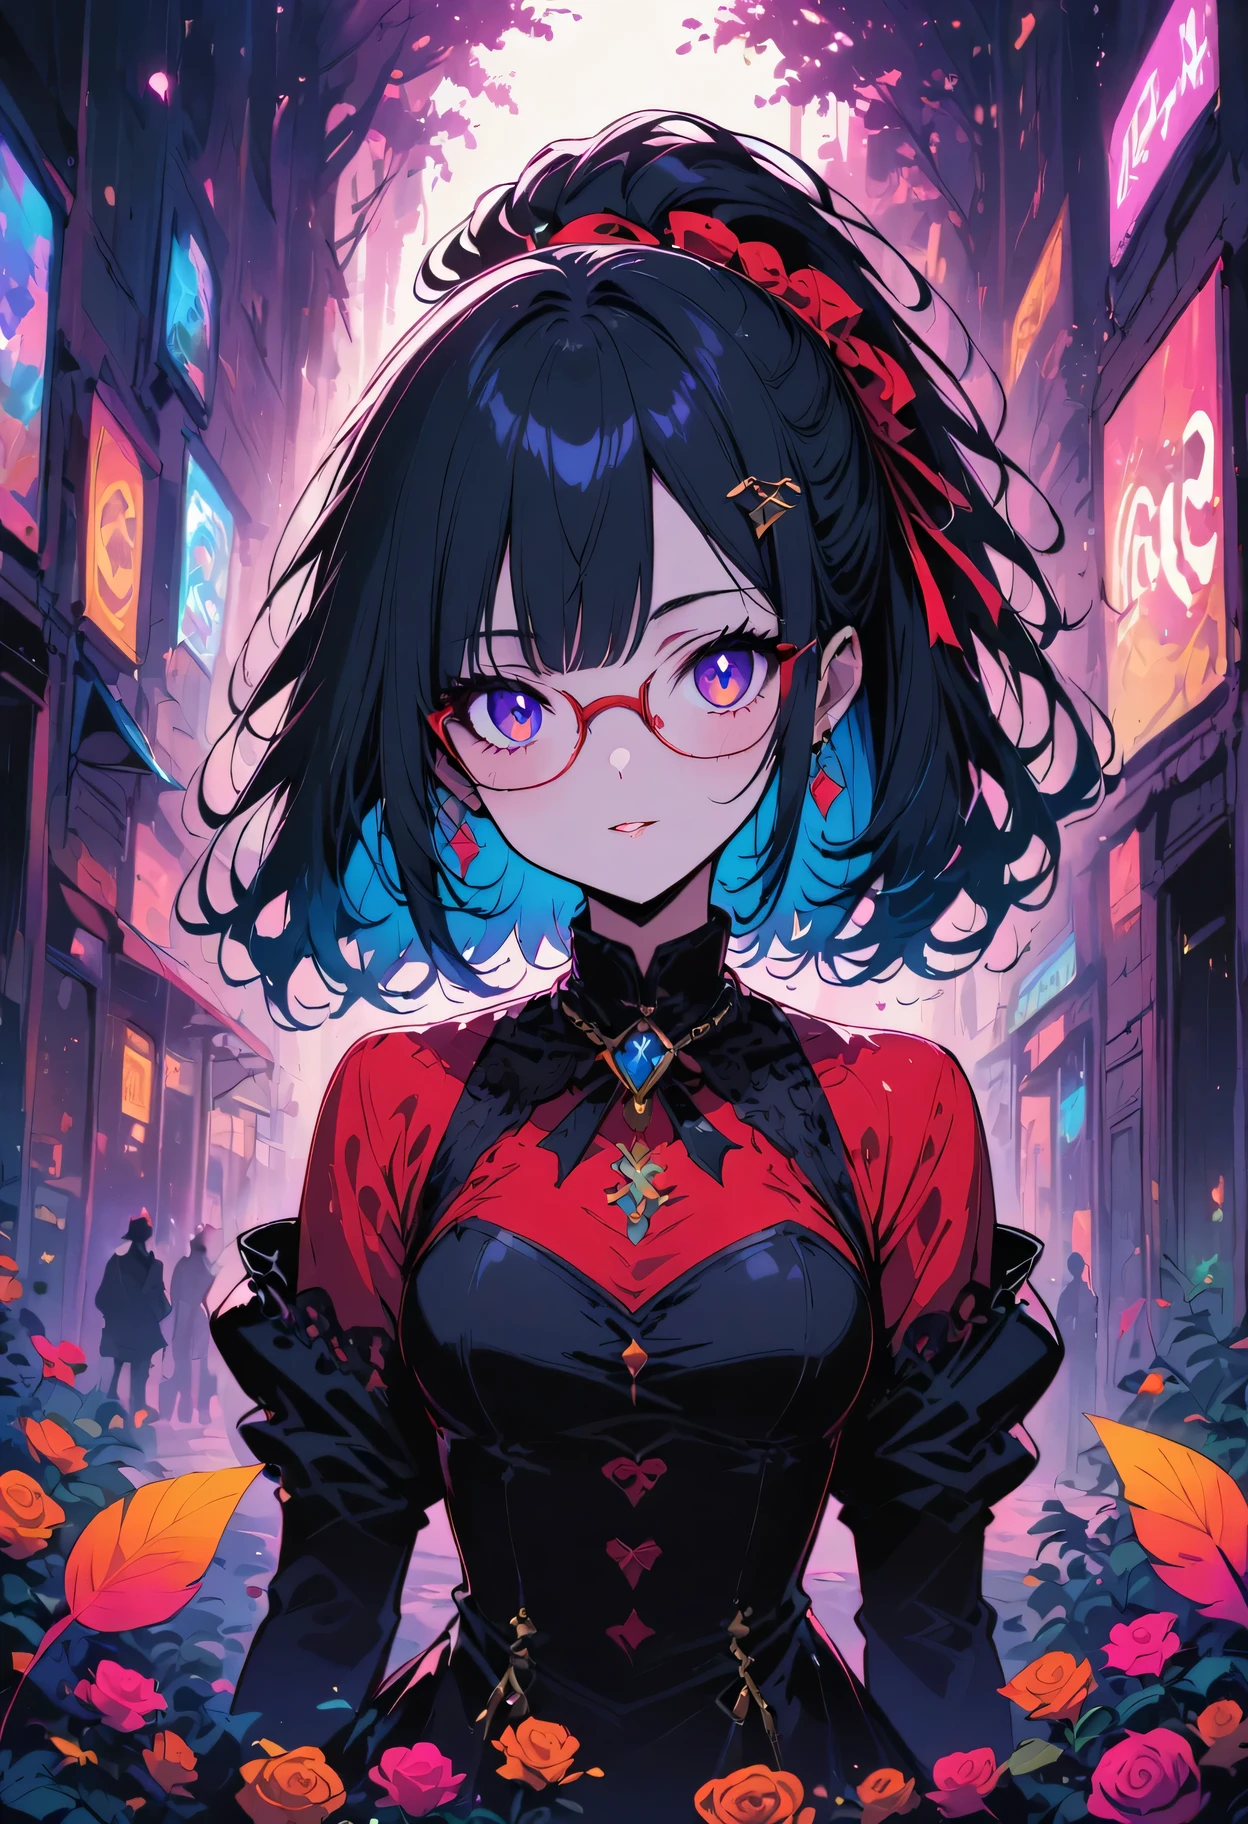 Retro aesthetic girl portrait in glasses in colorful circus environment